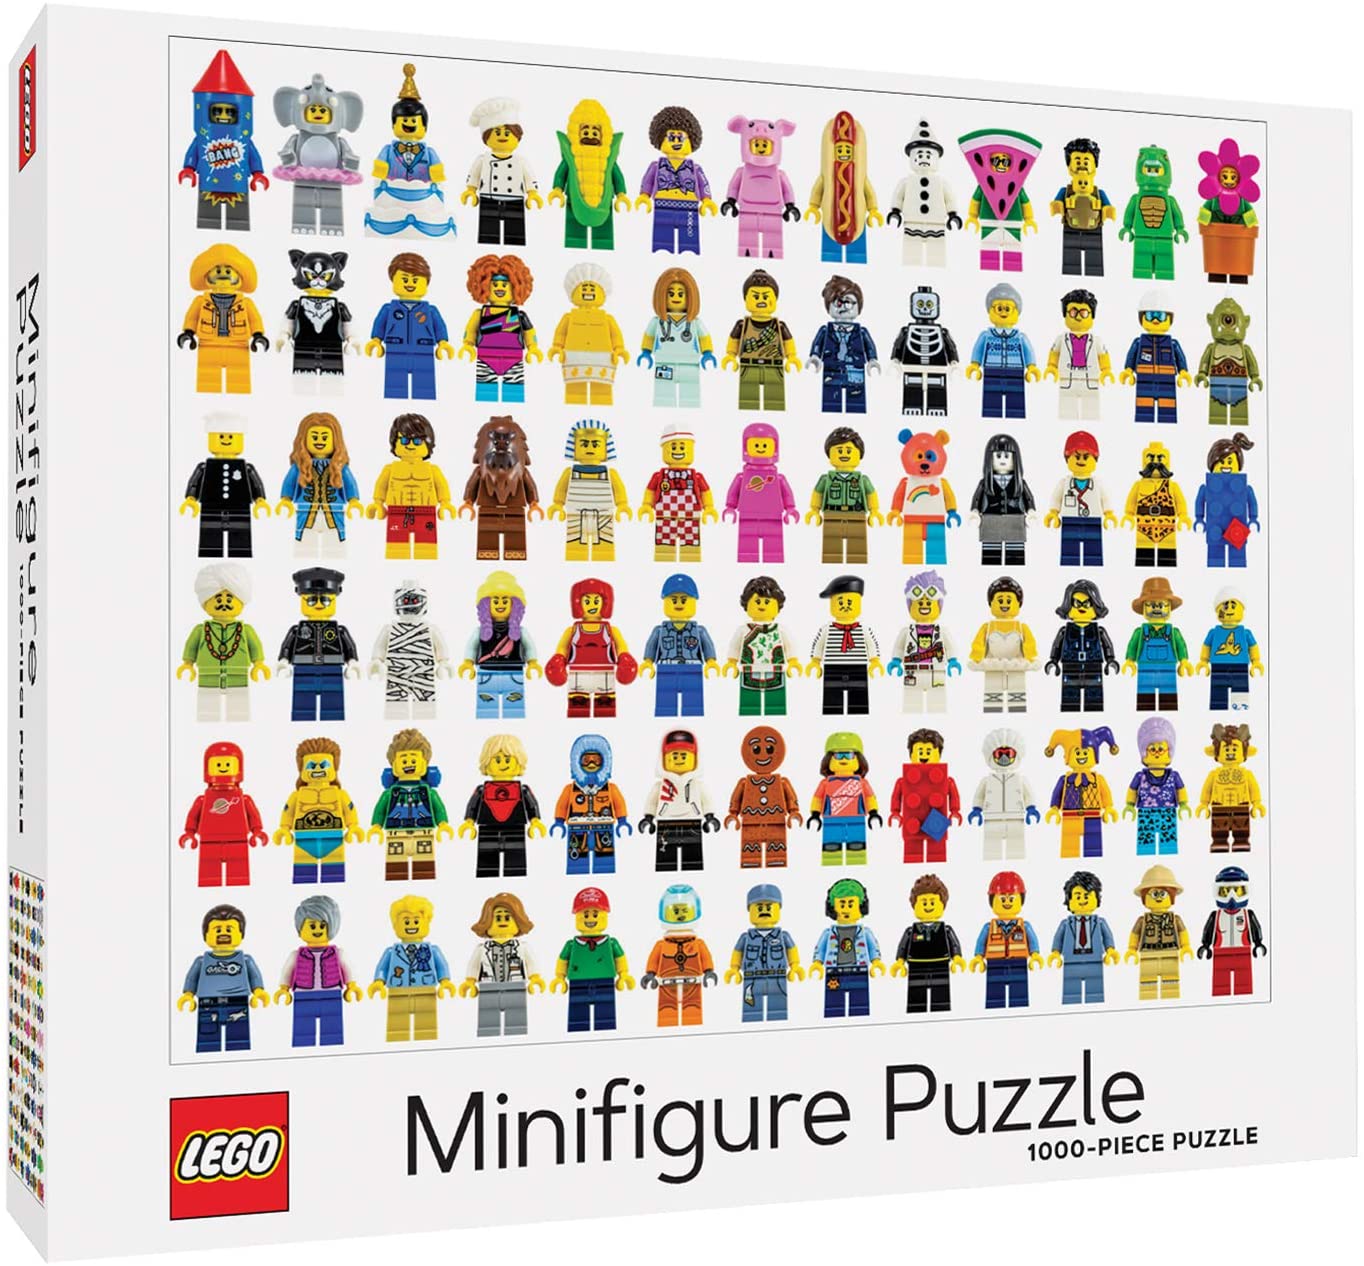 cool lego puzzles